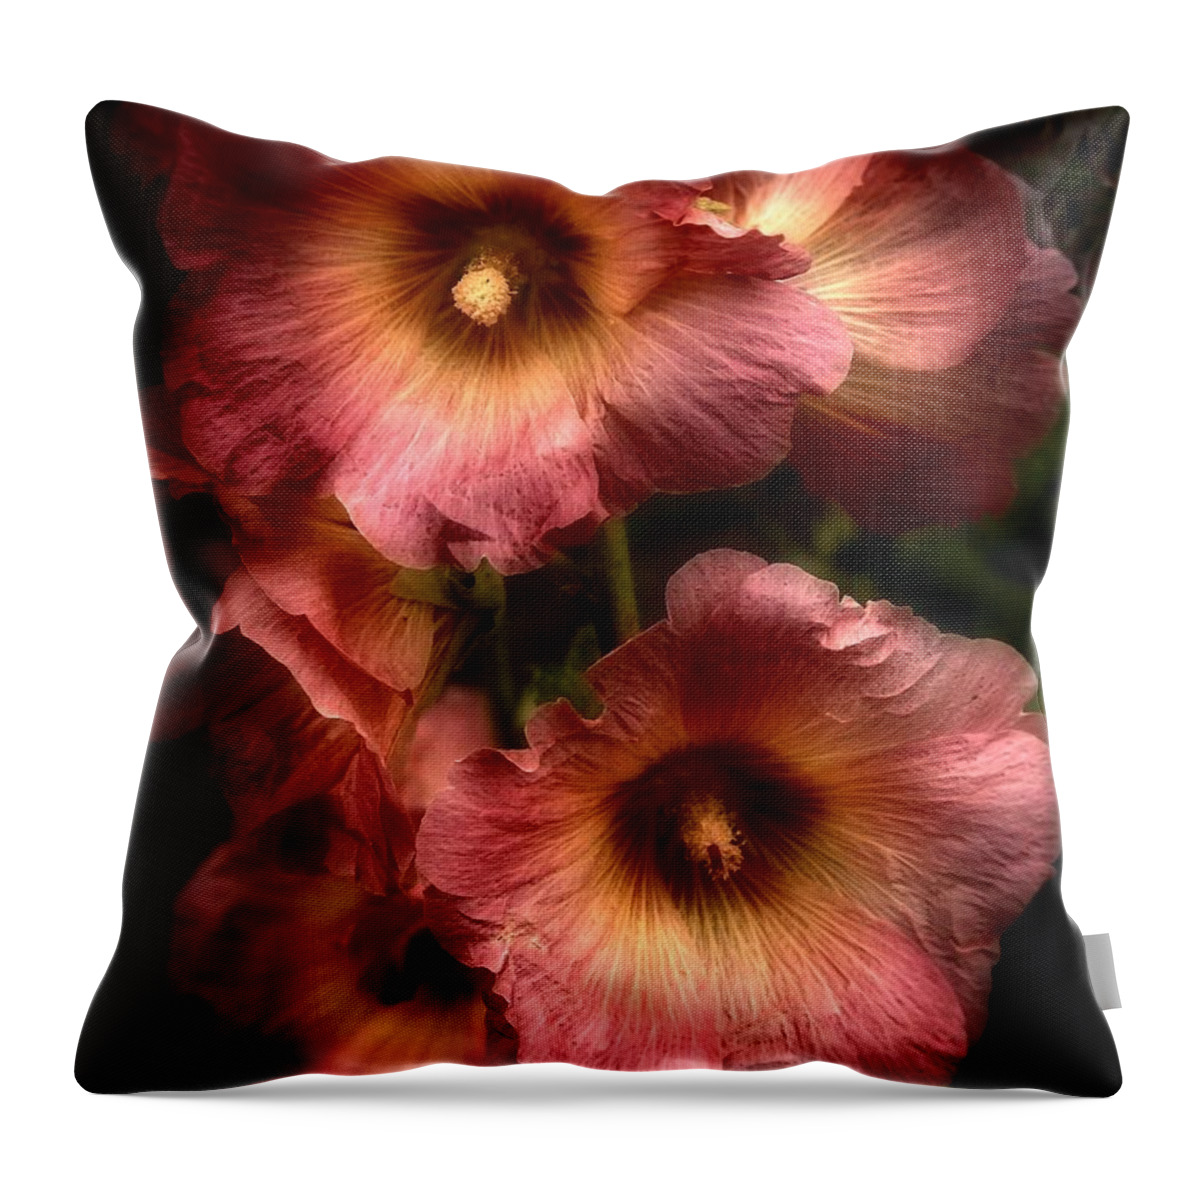 Flowers Throw Pillow featuring the photograph Romantic Hollyhock 2021 by Richard Cummings